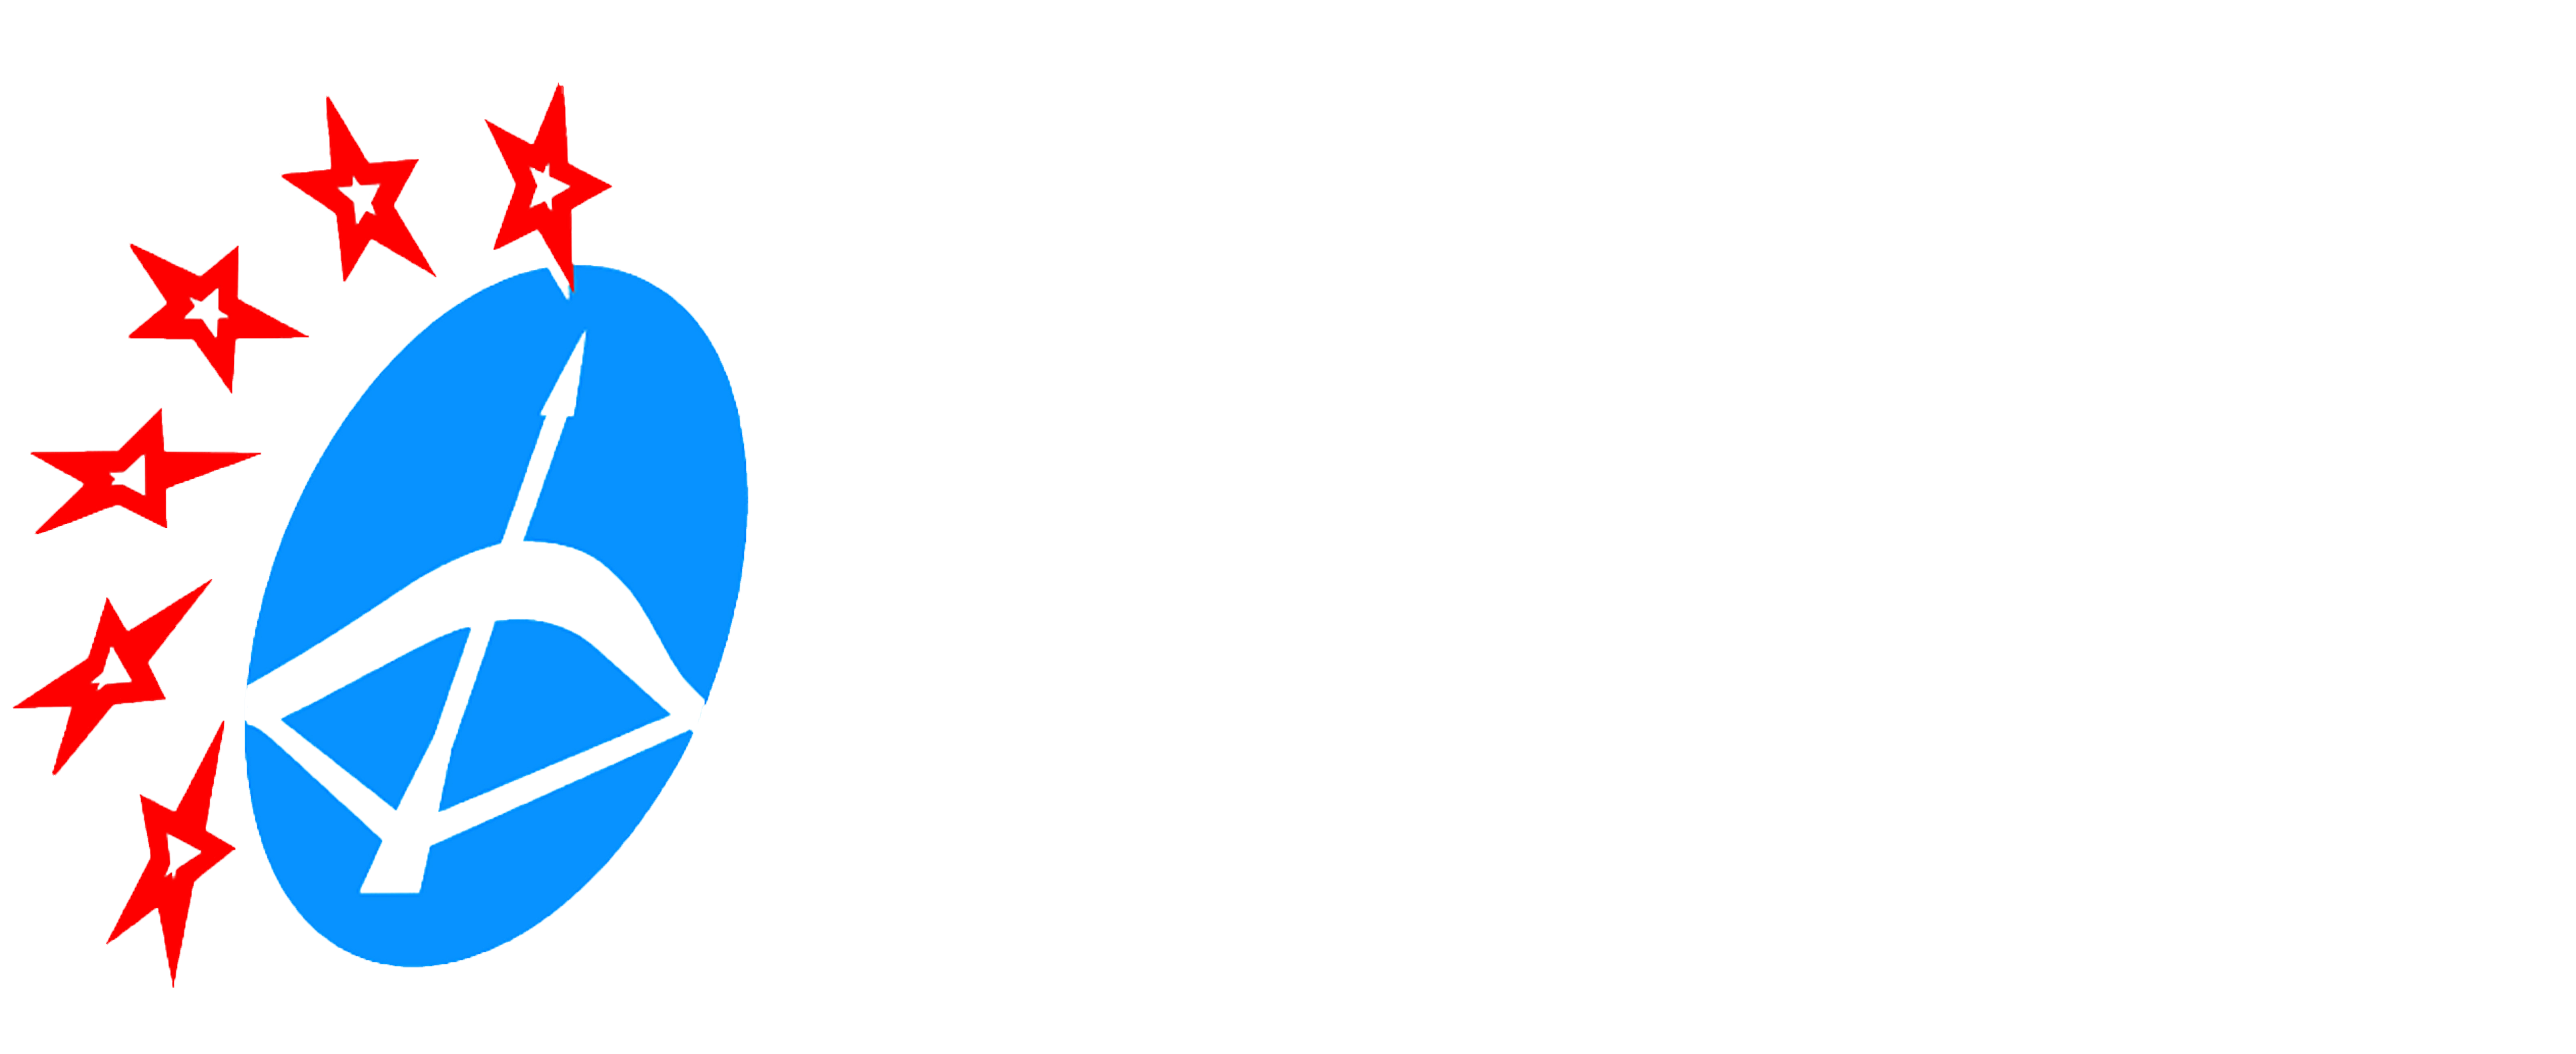 Legal clipart law ethics. Orion office thailand provides